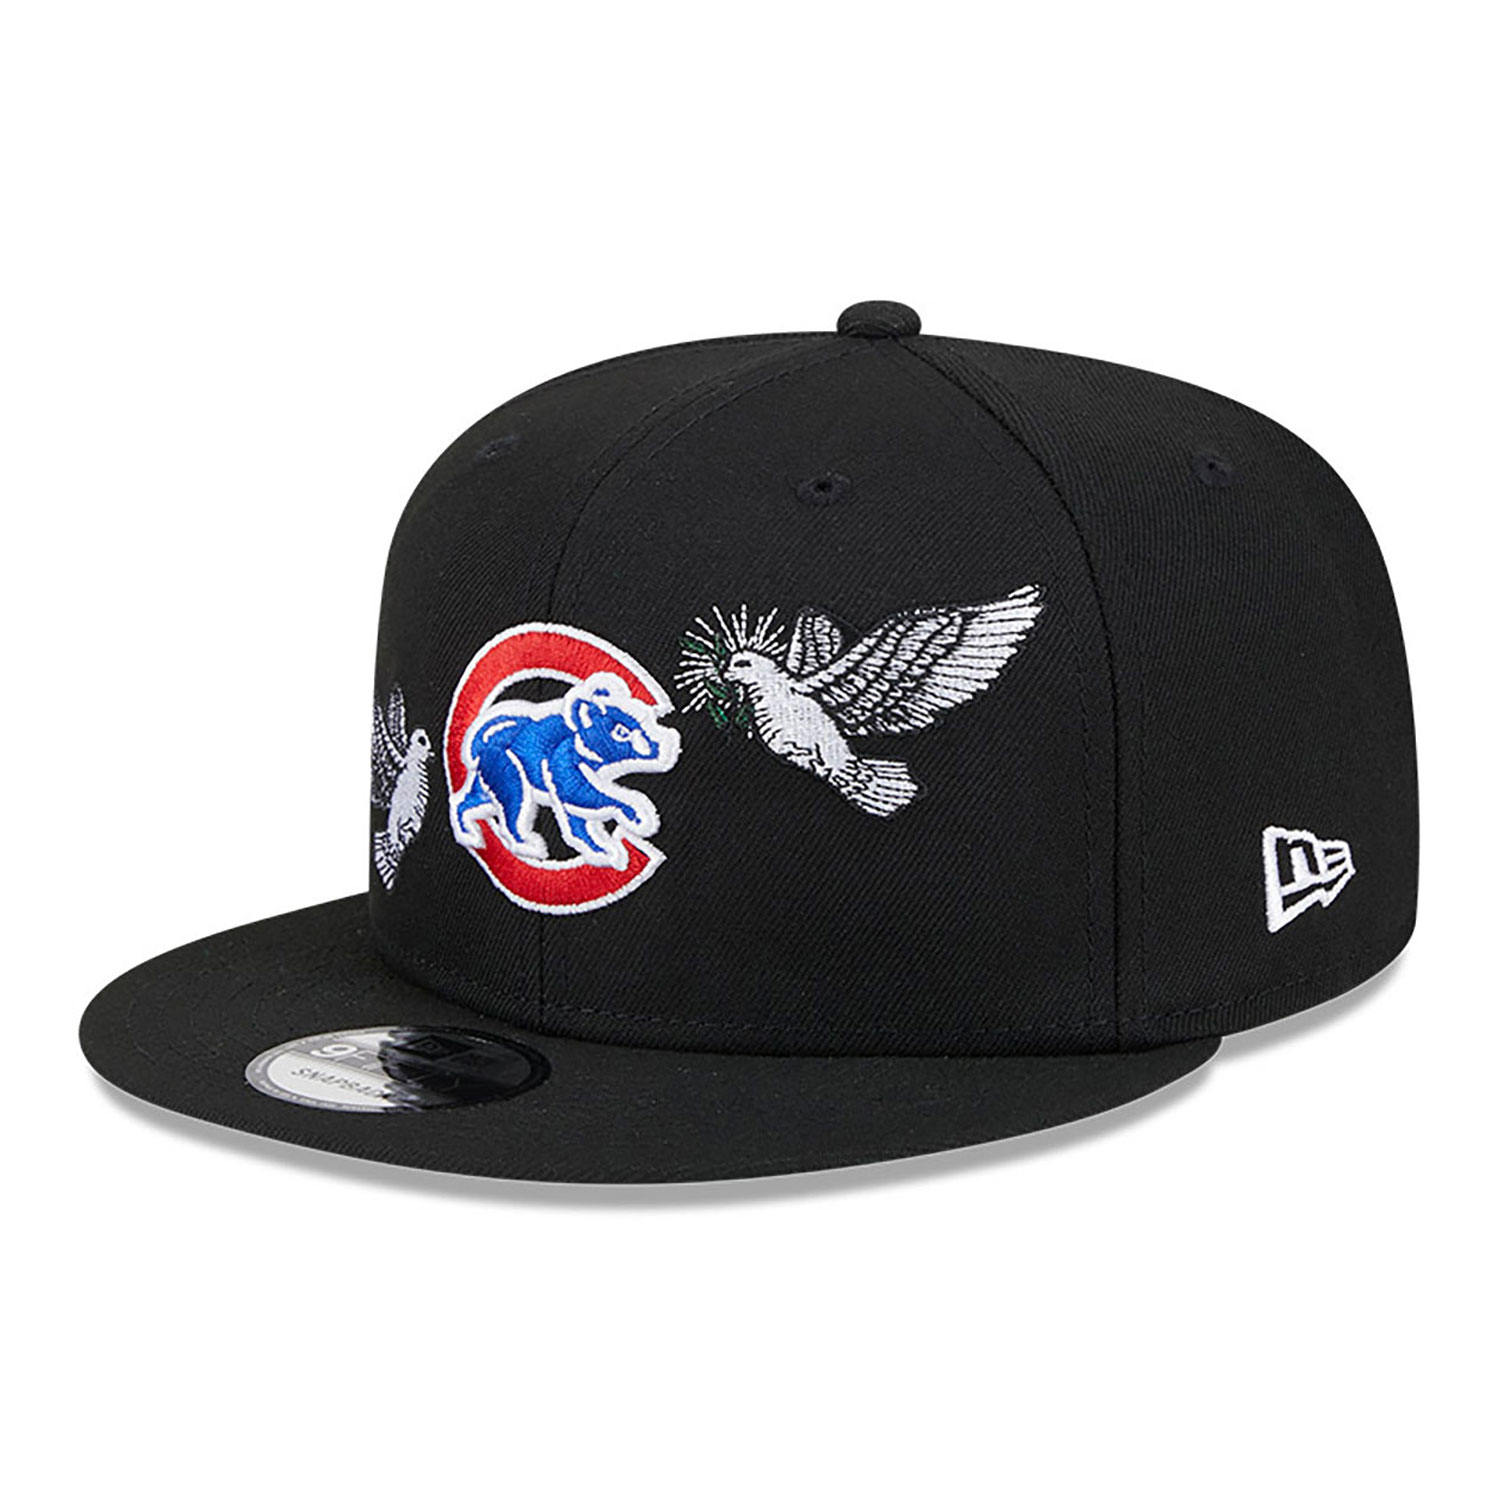 Chicago Cubs Peace Black 9FIFTY Snapback Cap